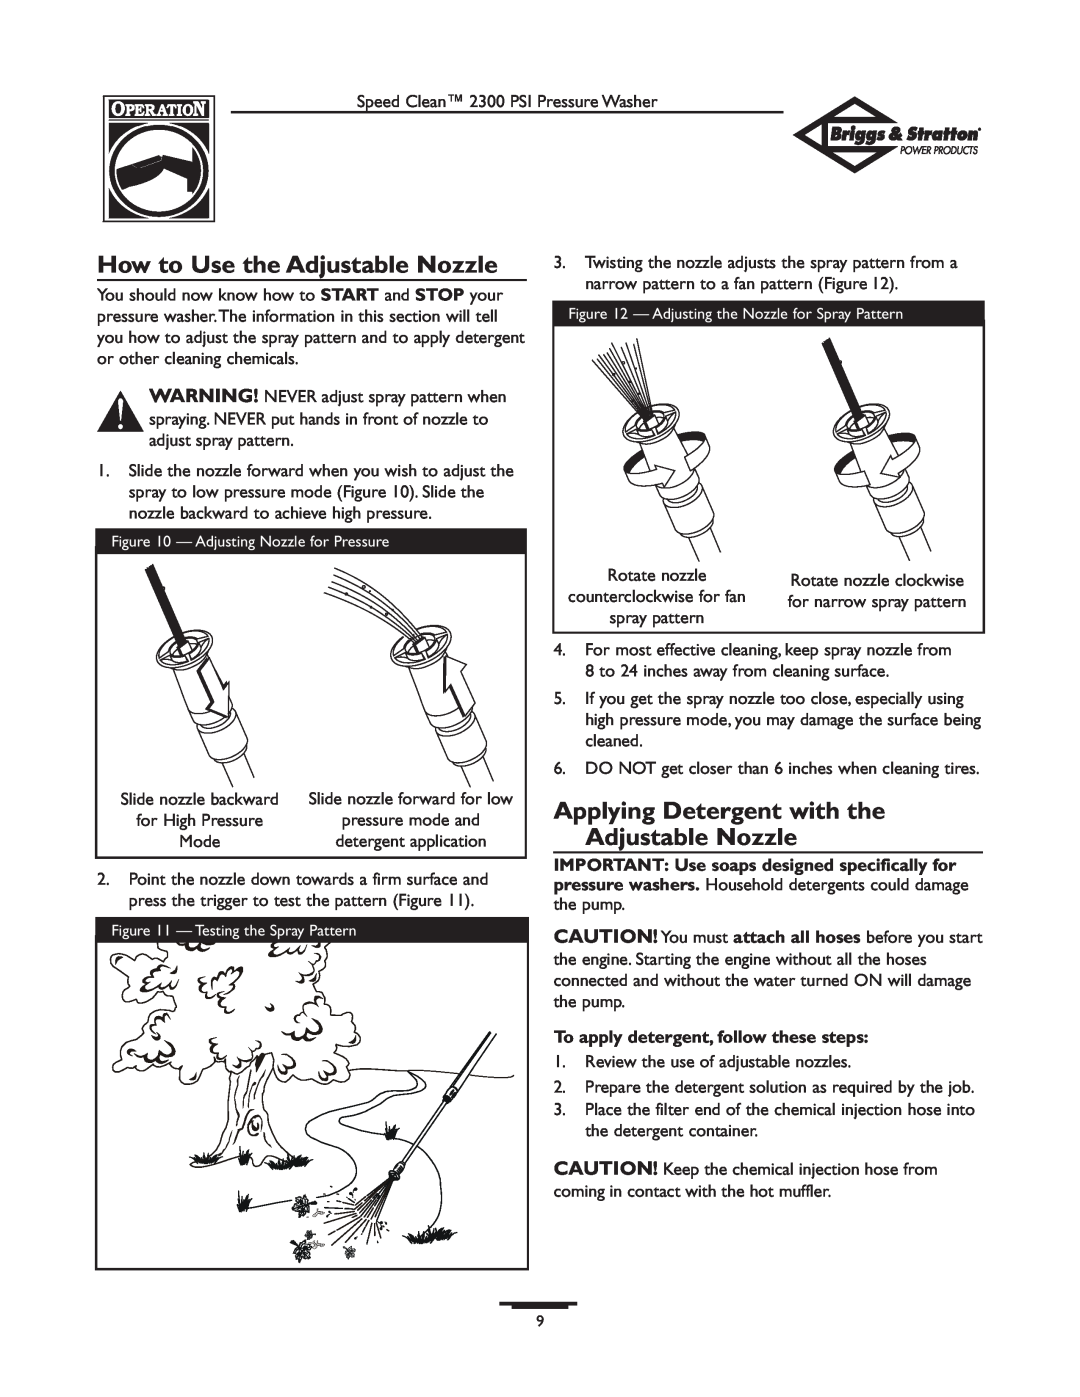 Briggs & Stratton 1909-0 owner manual How to Use the Adjustable Nozzle, Applying Detergent with the Adjustable Nozzle 